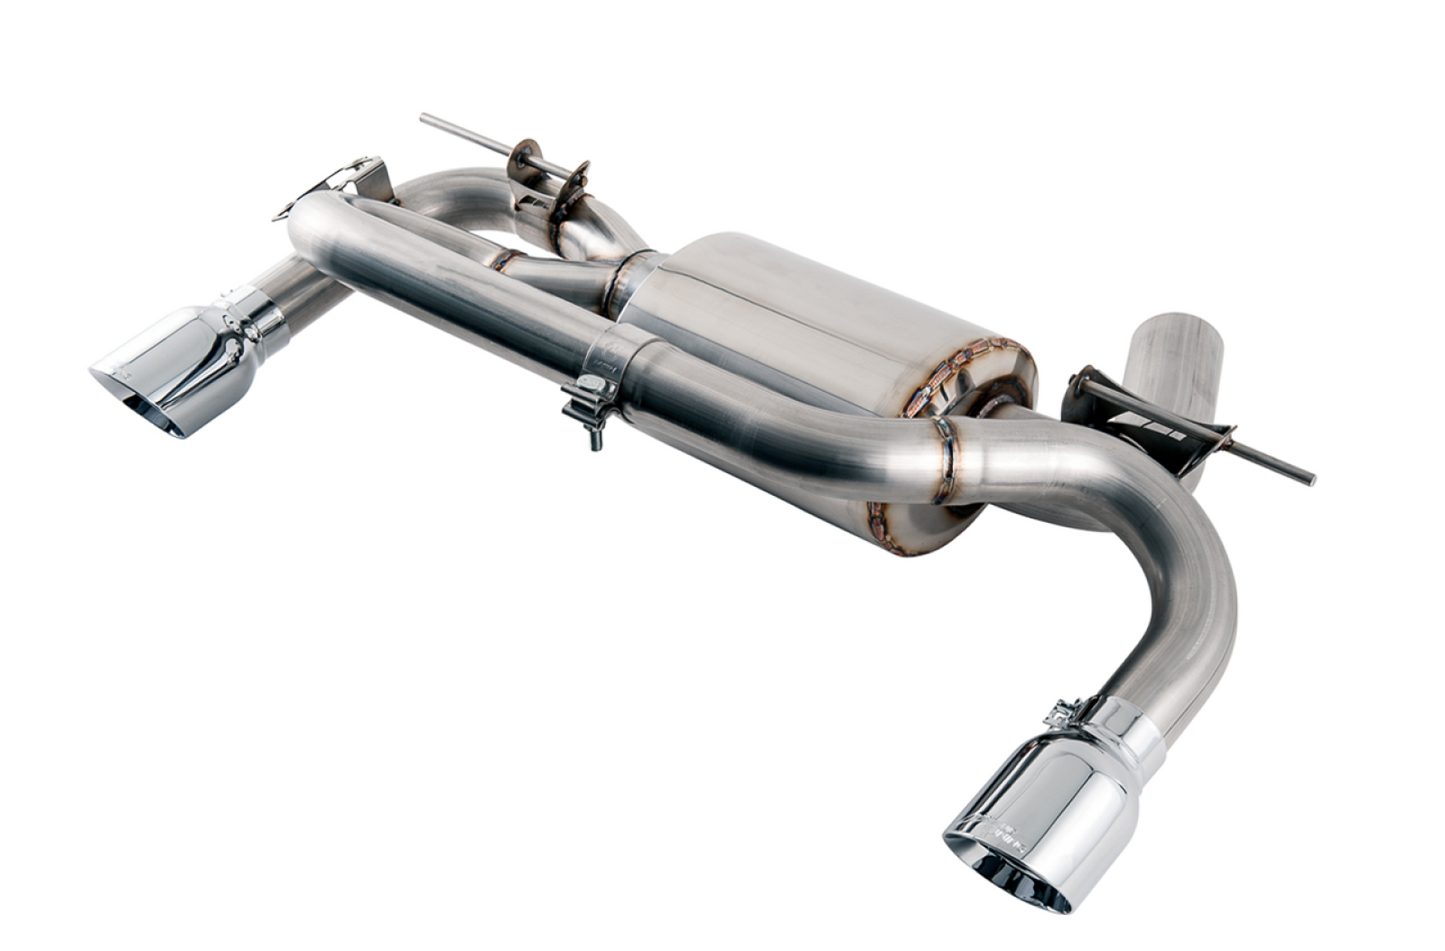 AWE Tuning Touring Edition Axle Back Exhaust for BMW F3X 335i/435i - Chrome Silver Tips (90mm) 3010-32024